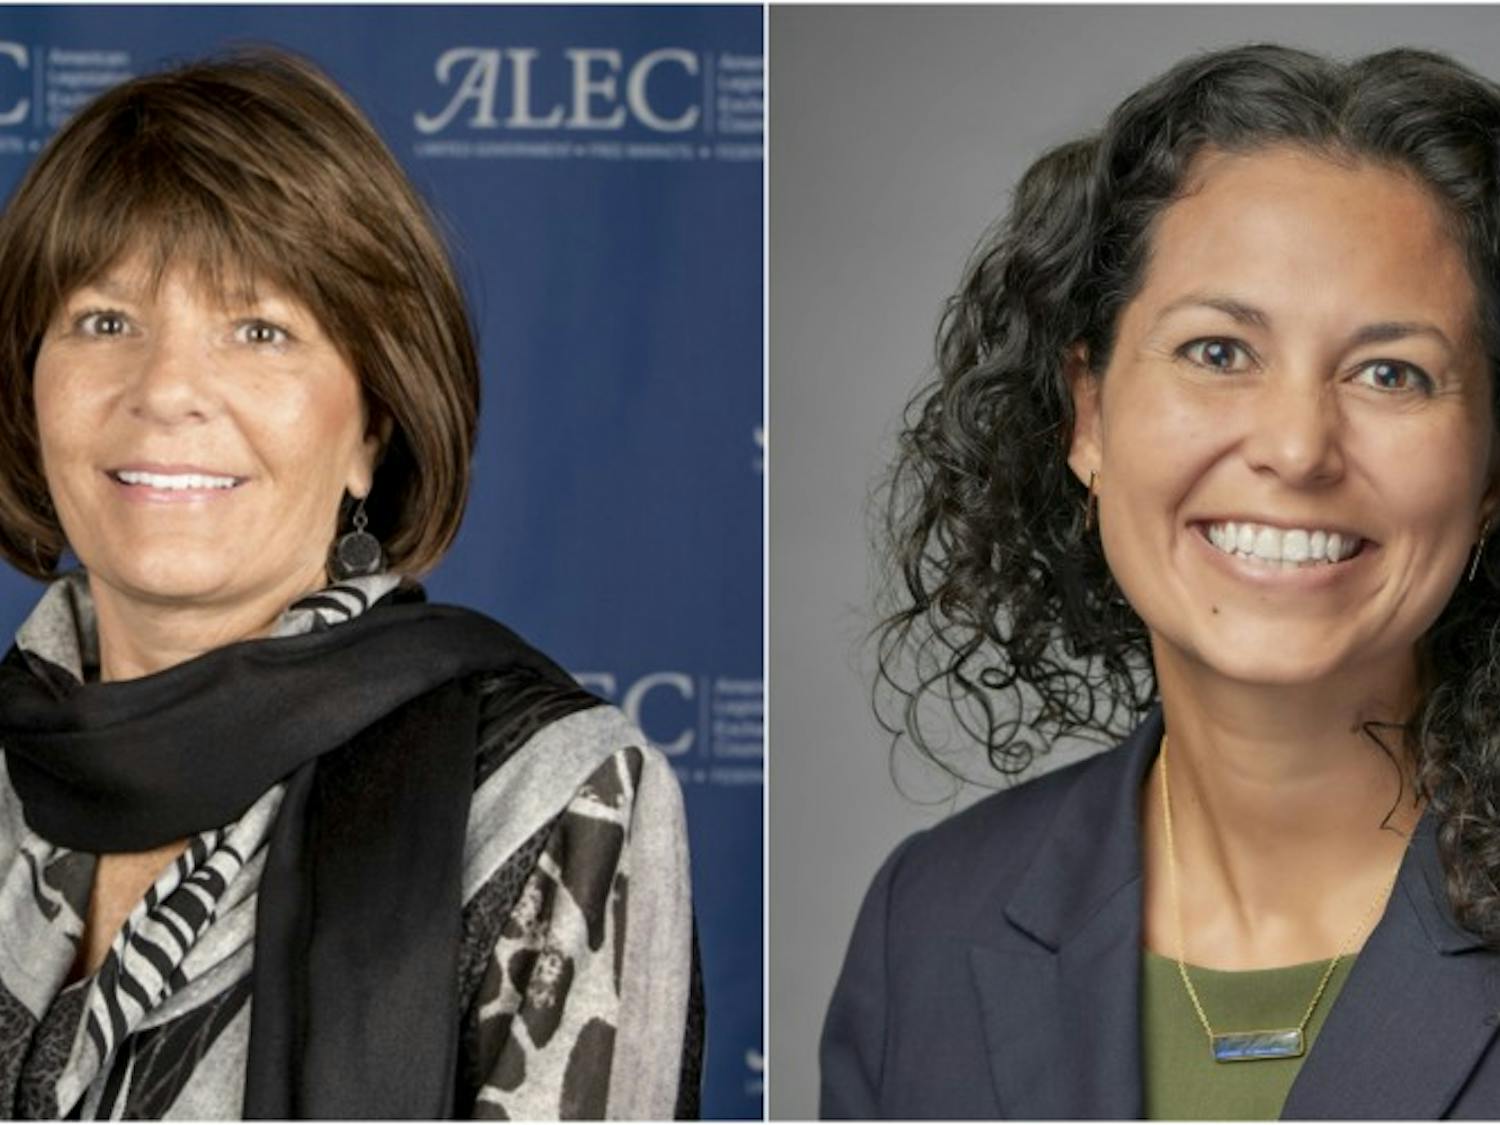 Yvette Herrell (left) and Xotchitl Torres Small (right) are the lead candidates for the CD-2 election. The seat is currently held by Republican Steve Pearce.